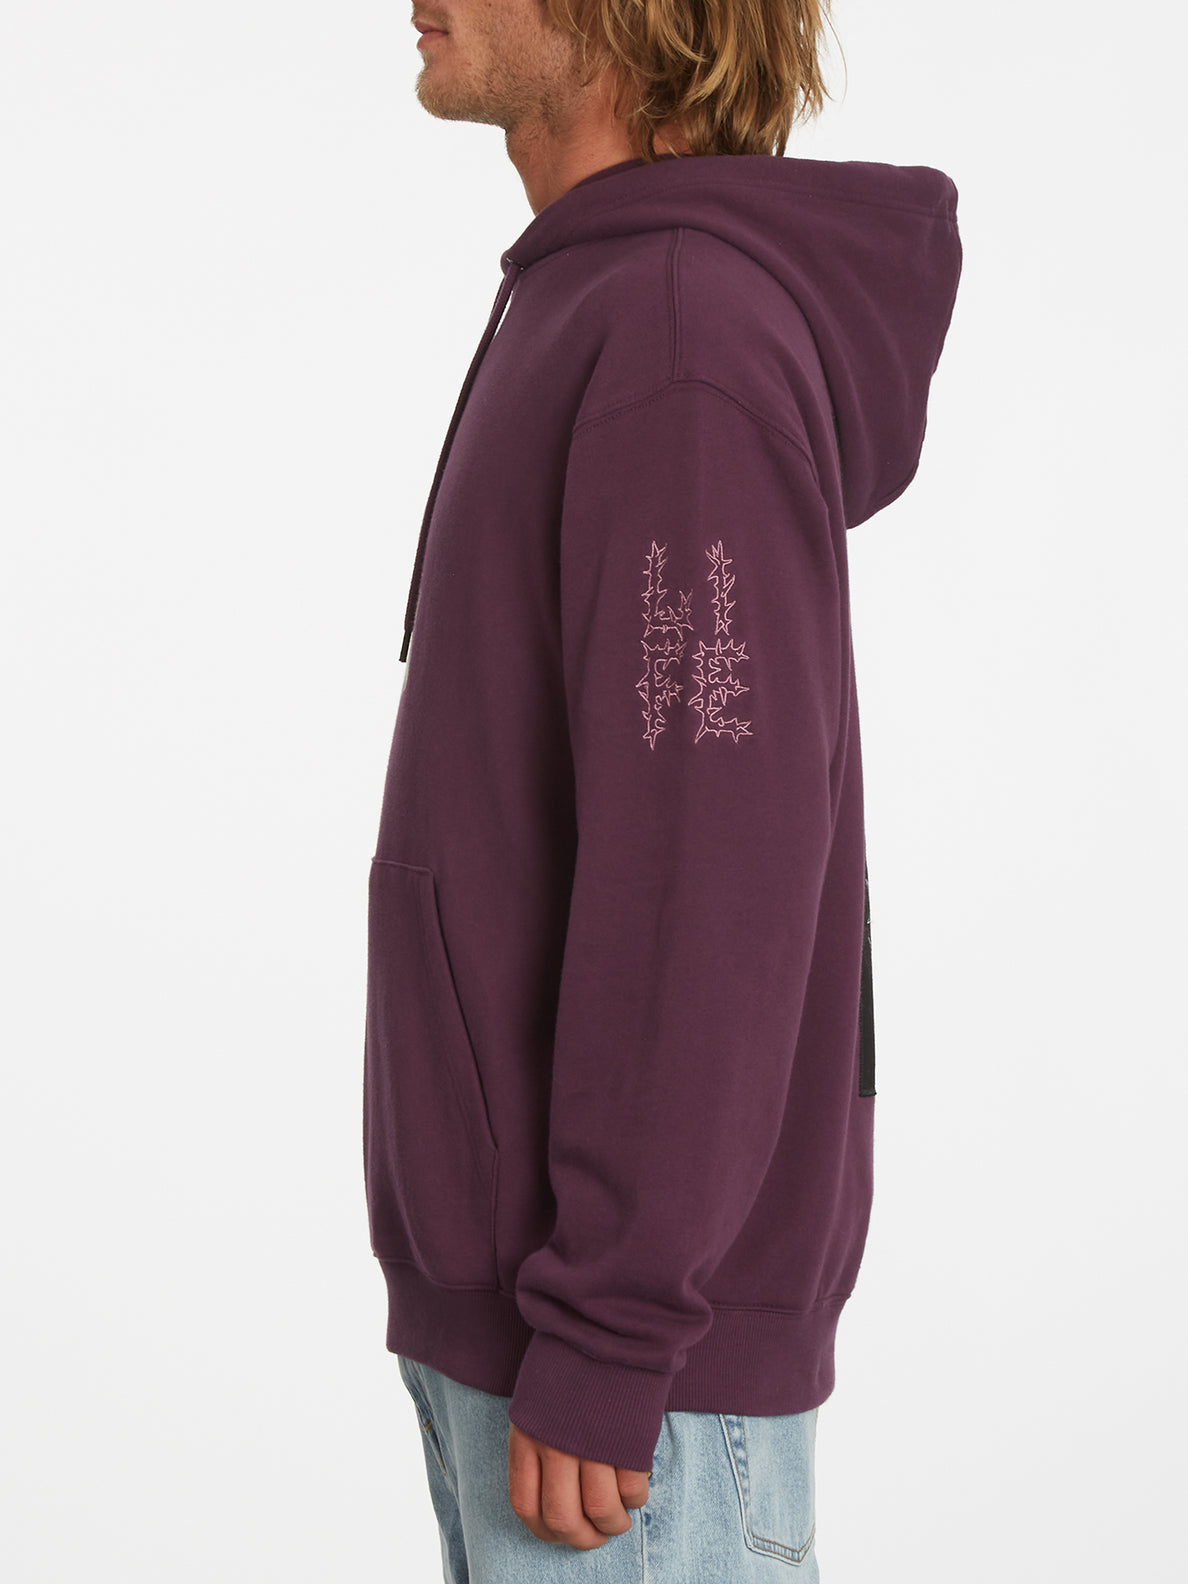 Featured Artist Vaderetro Pullover Hoodie - Mulberry (A4132207_MUL) [1]